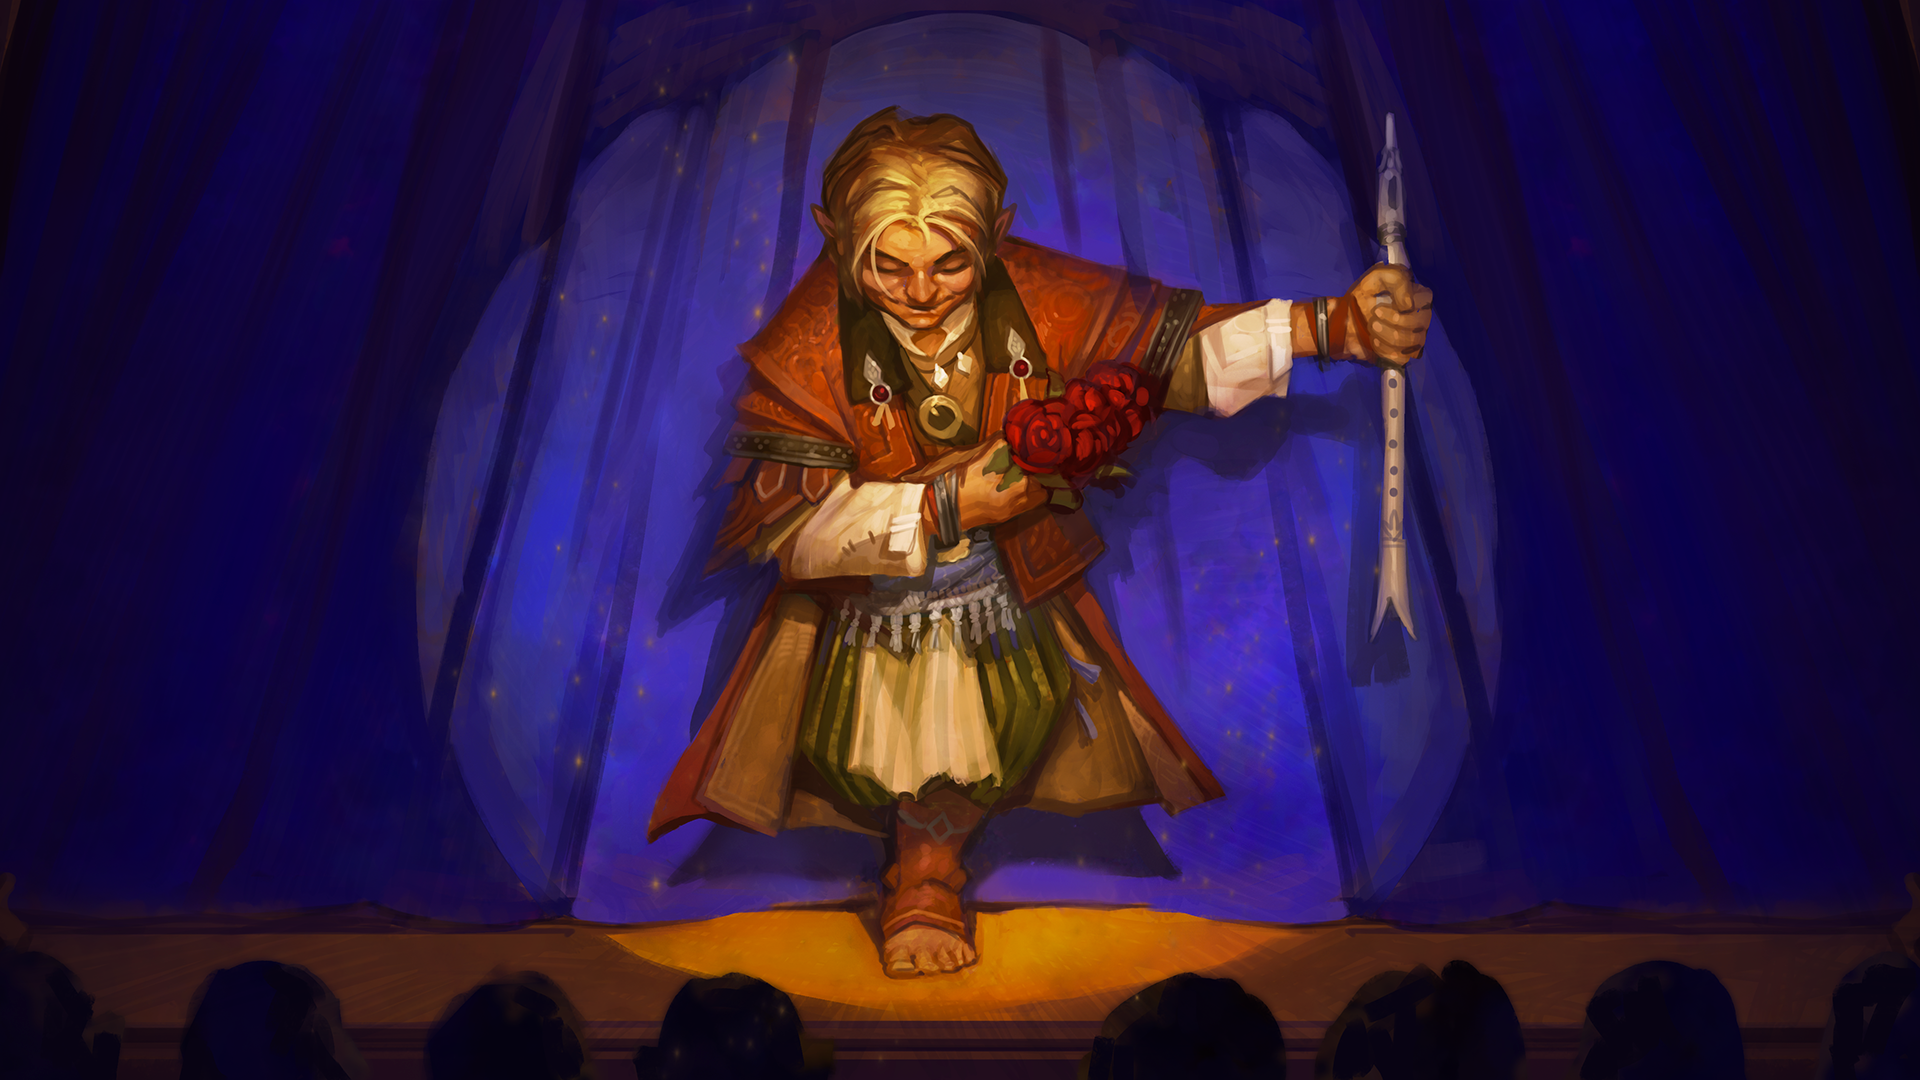 Pathfinder iconic bard, Lem, holding his flute out to the side while he bows to the audience from center stage